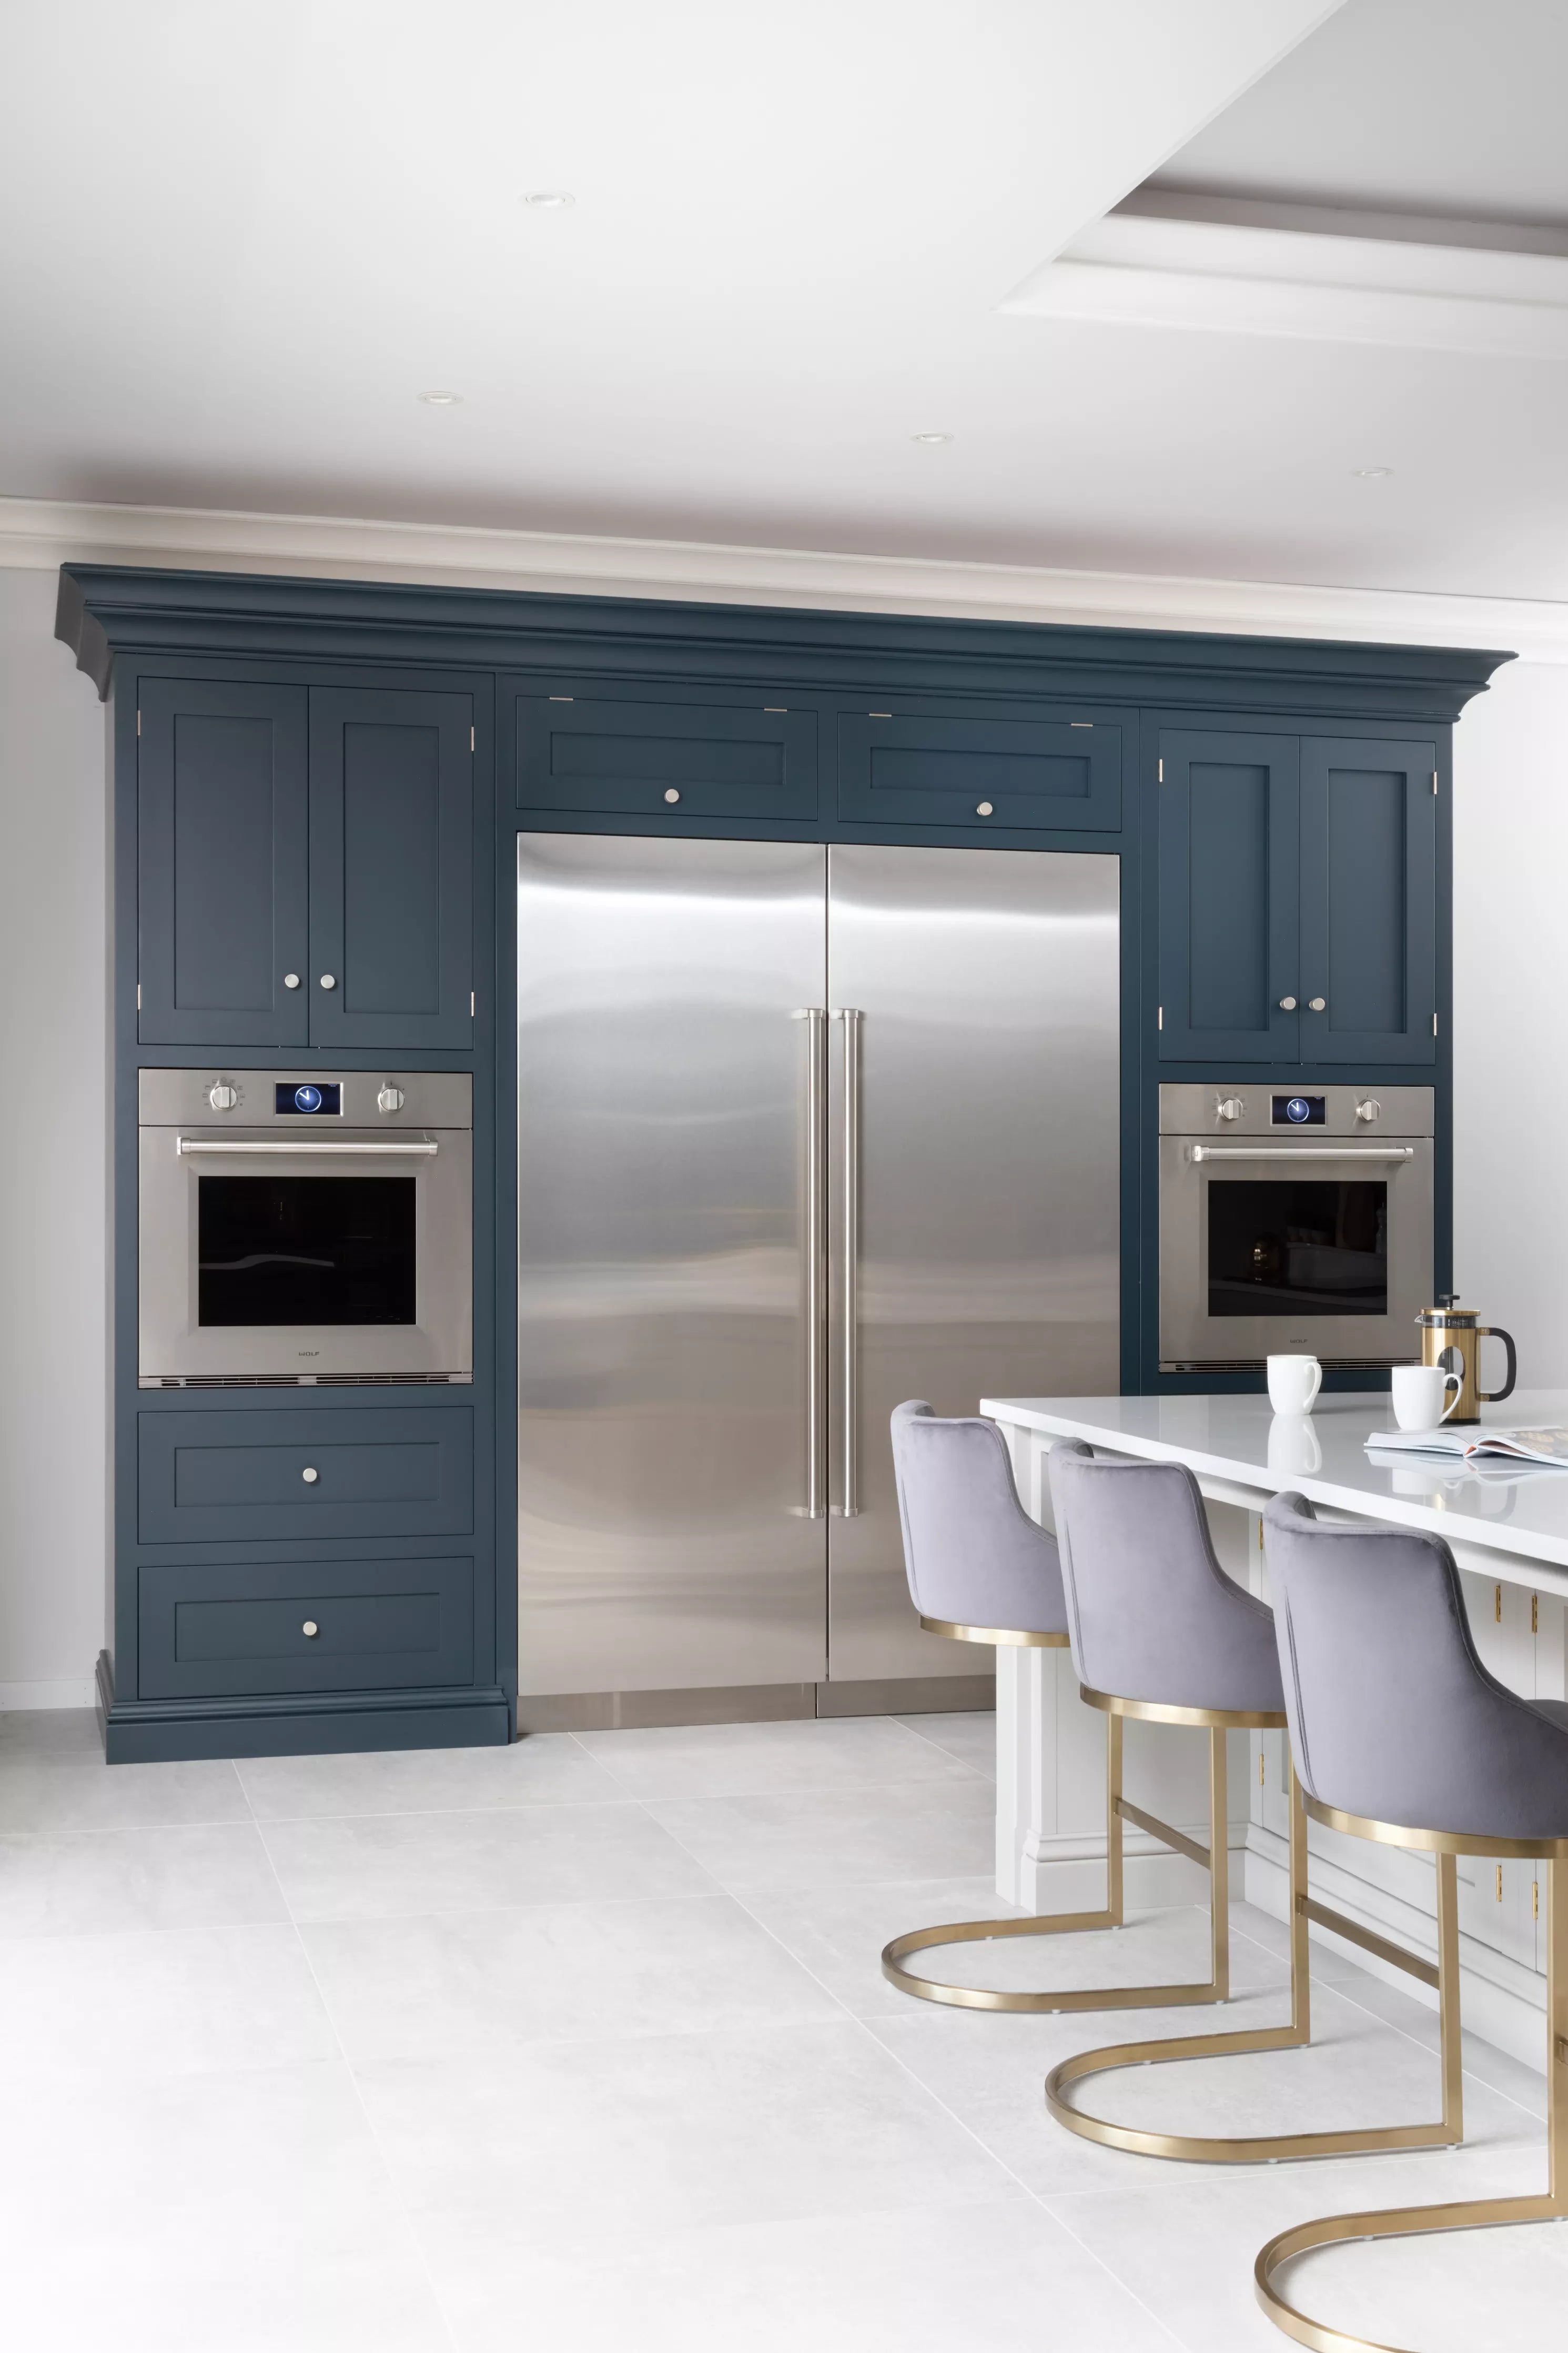 The Blue and Grey Kitchen